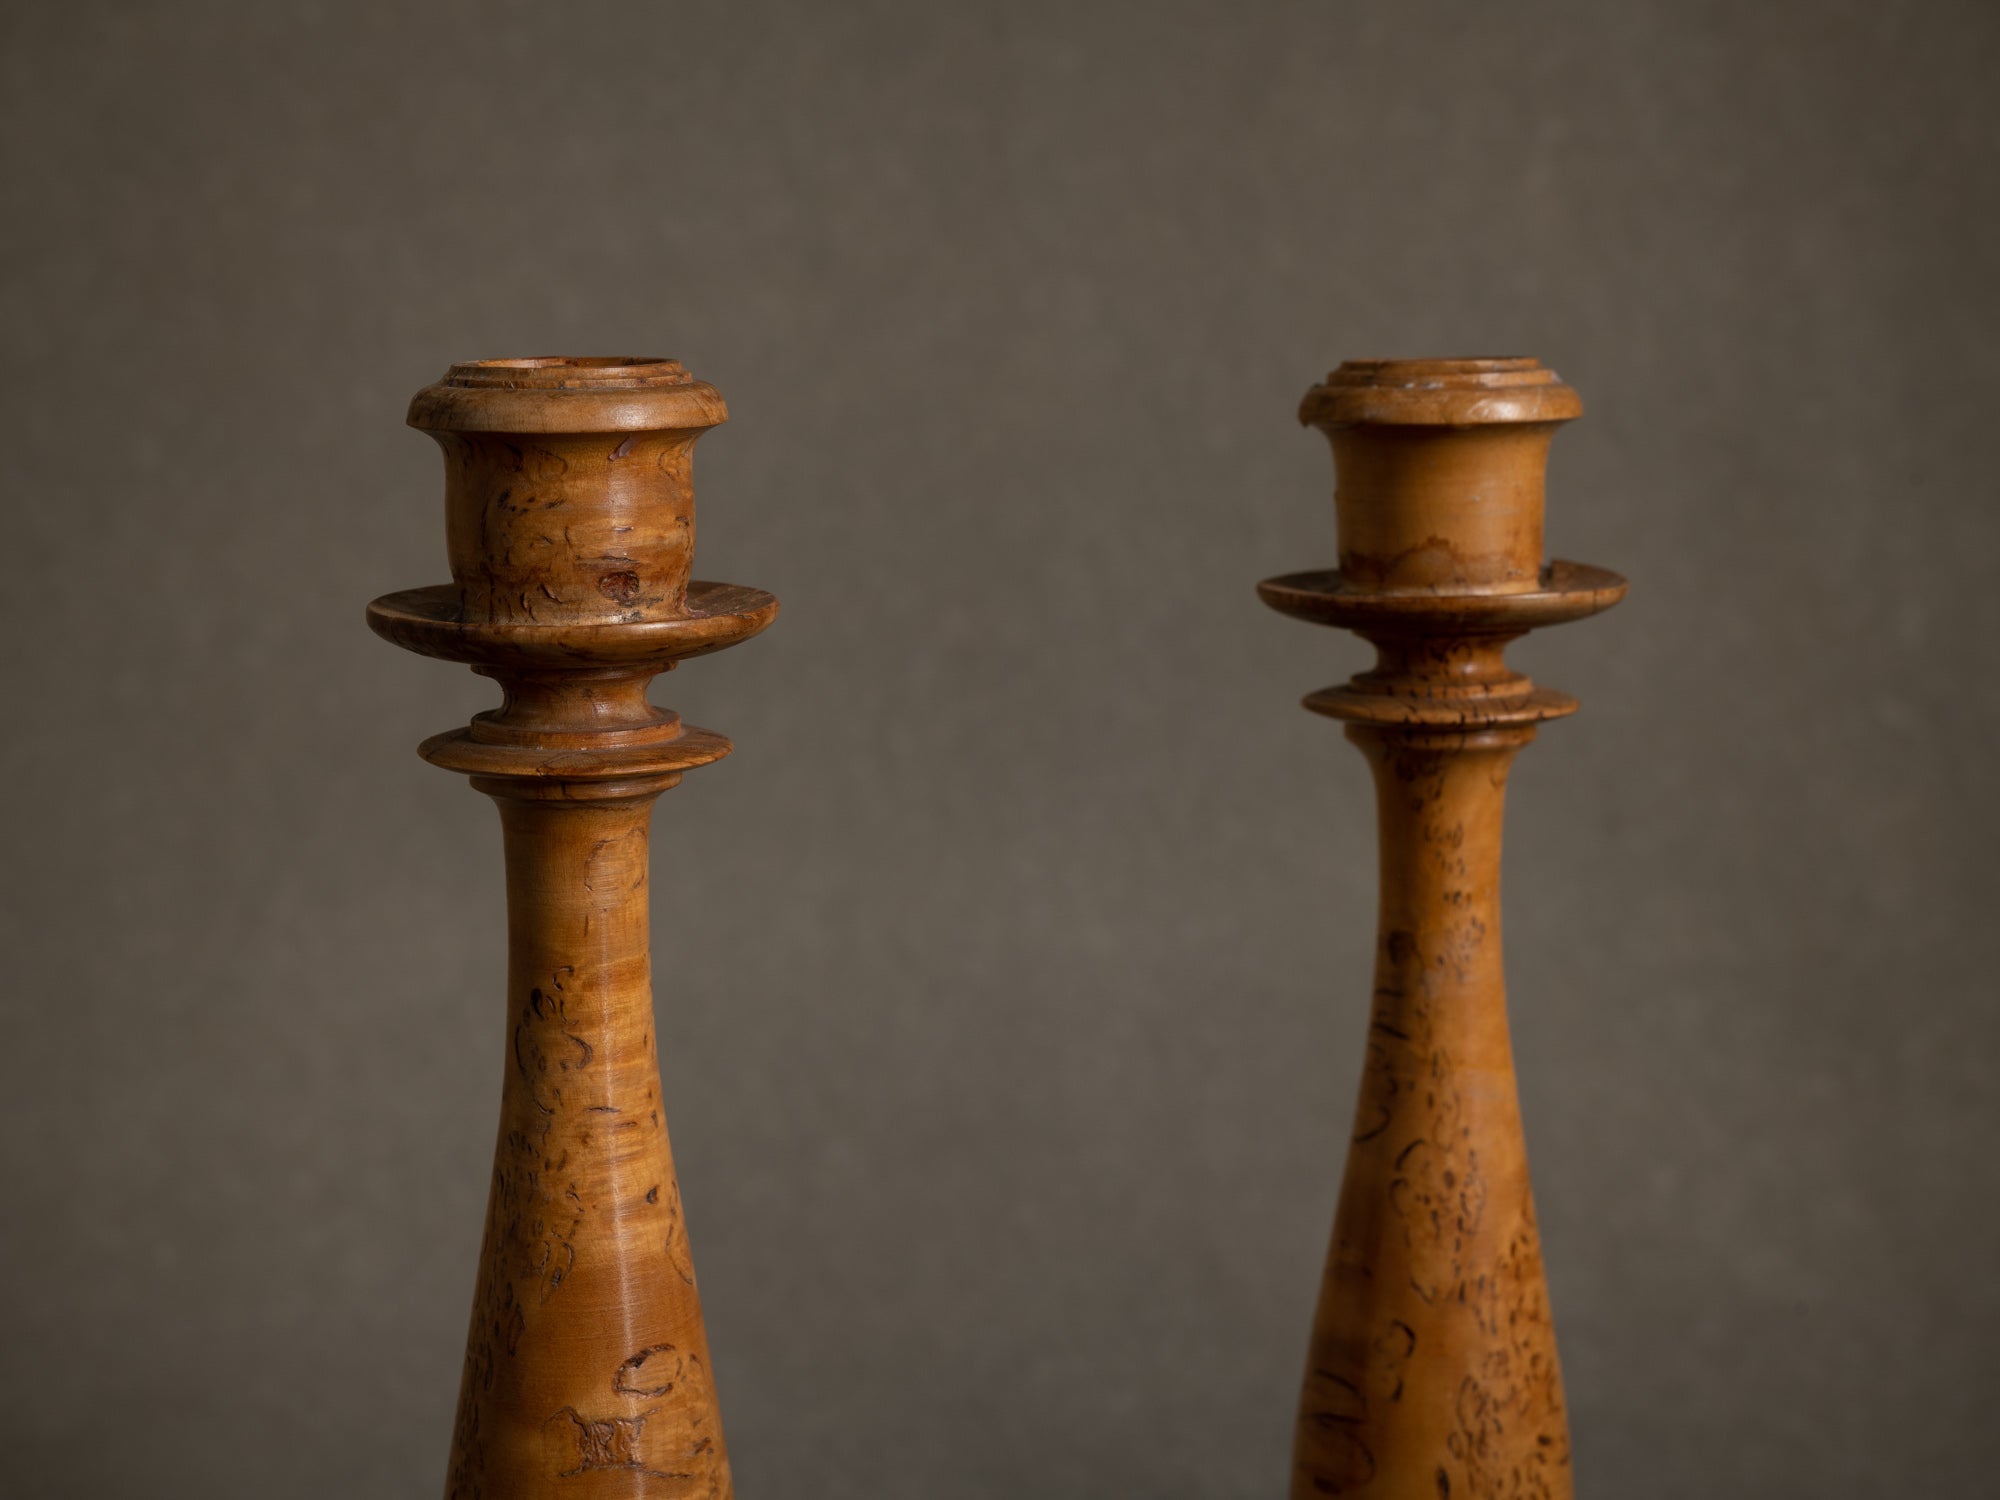 Paire de bougeoirs / flambeaux gustavien en bouleau tourné, Suède (vers 1850-1900)..Pair of gustavian candle holders in turned solid birch, Sweden (circa 1850-1900)